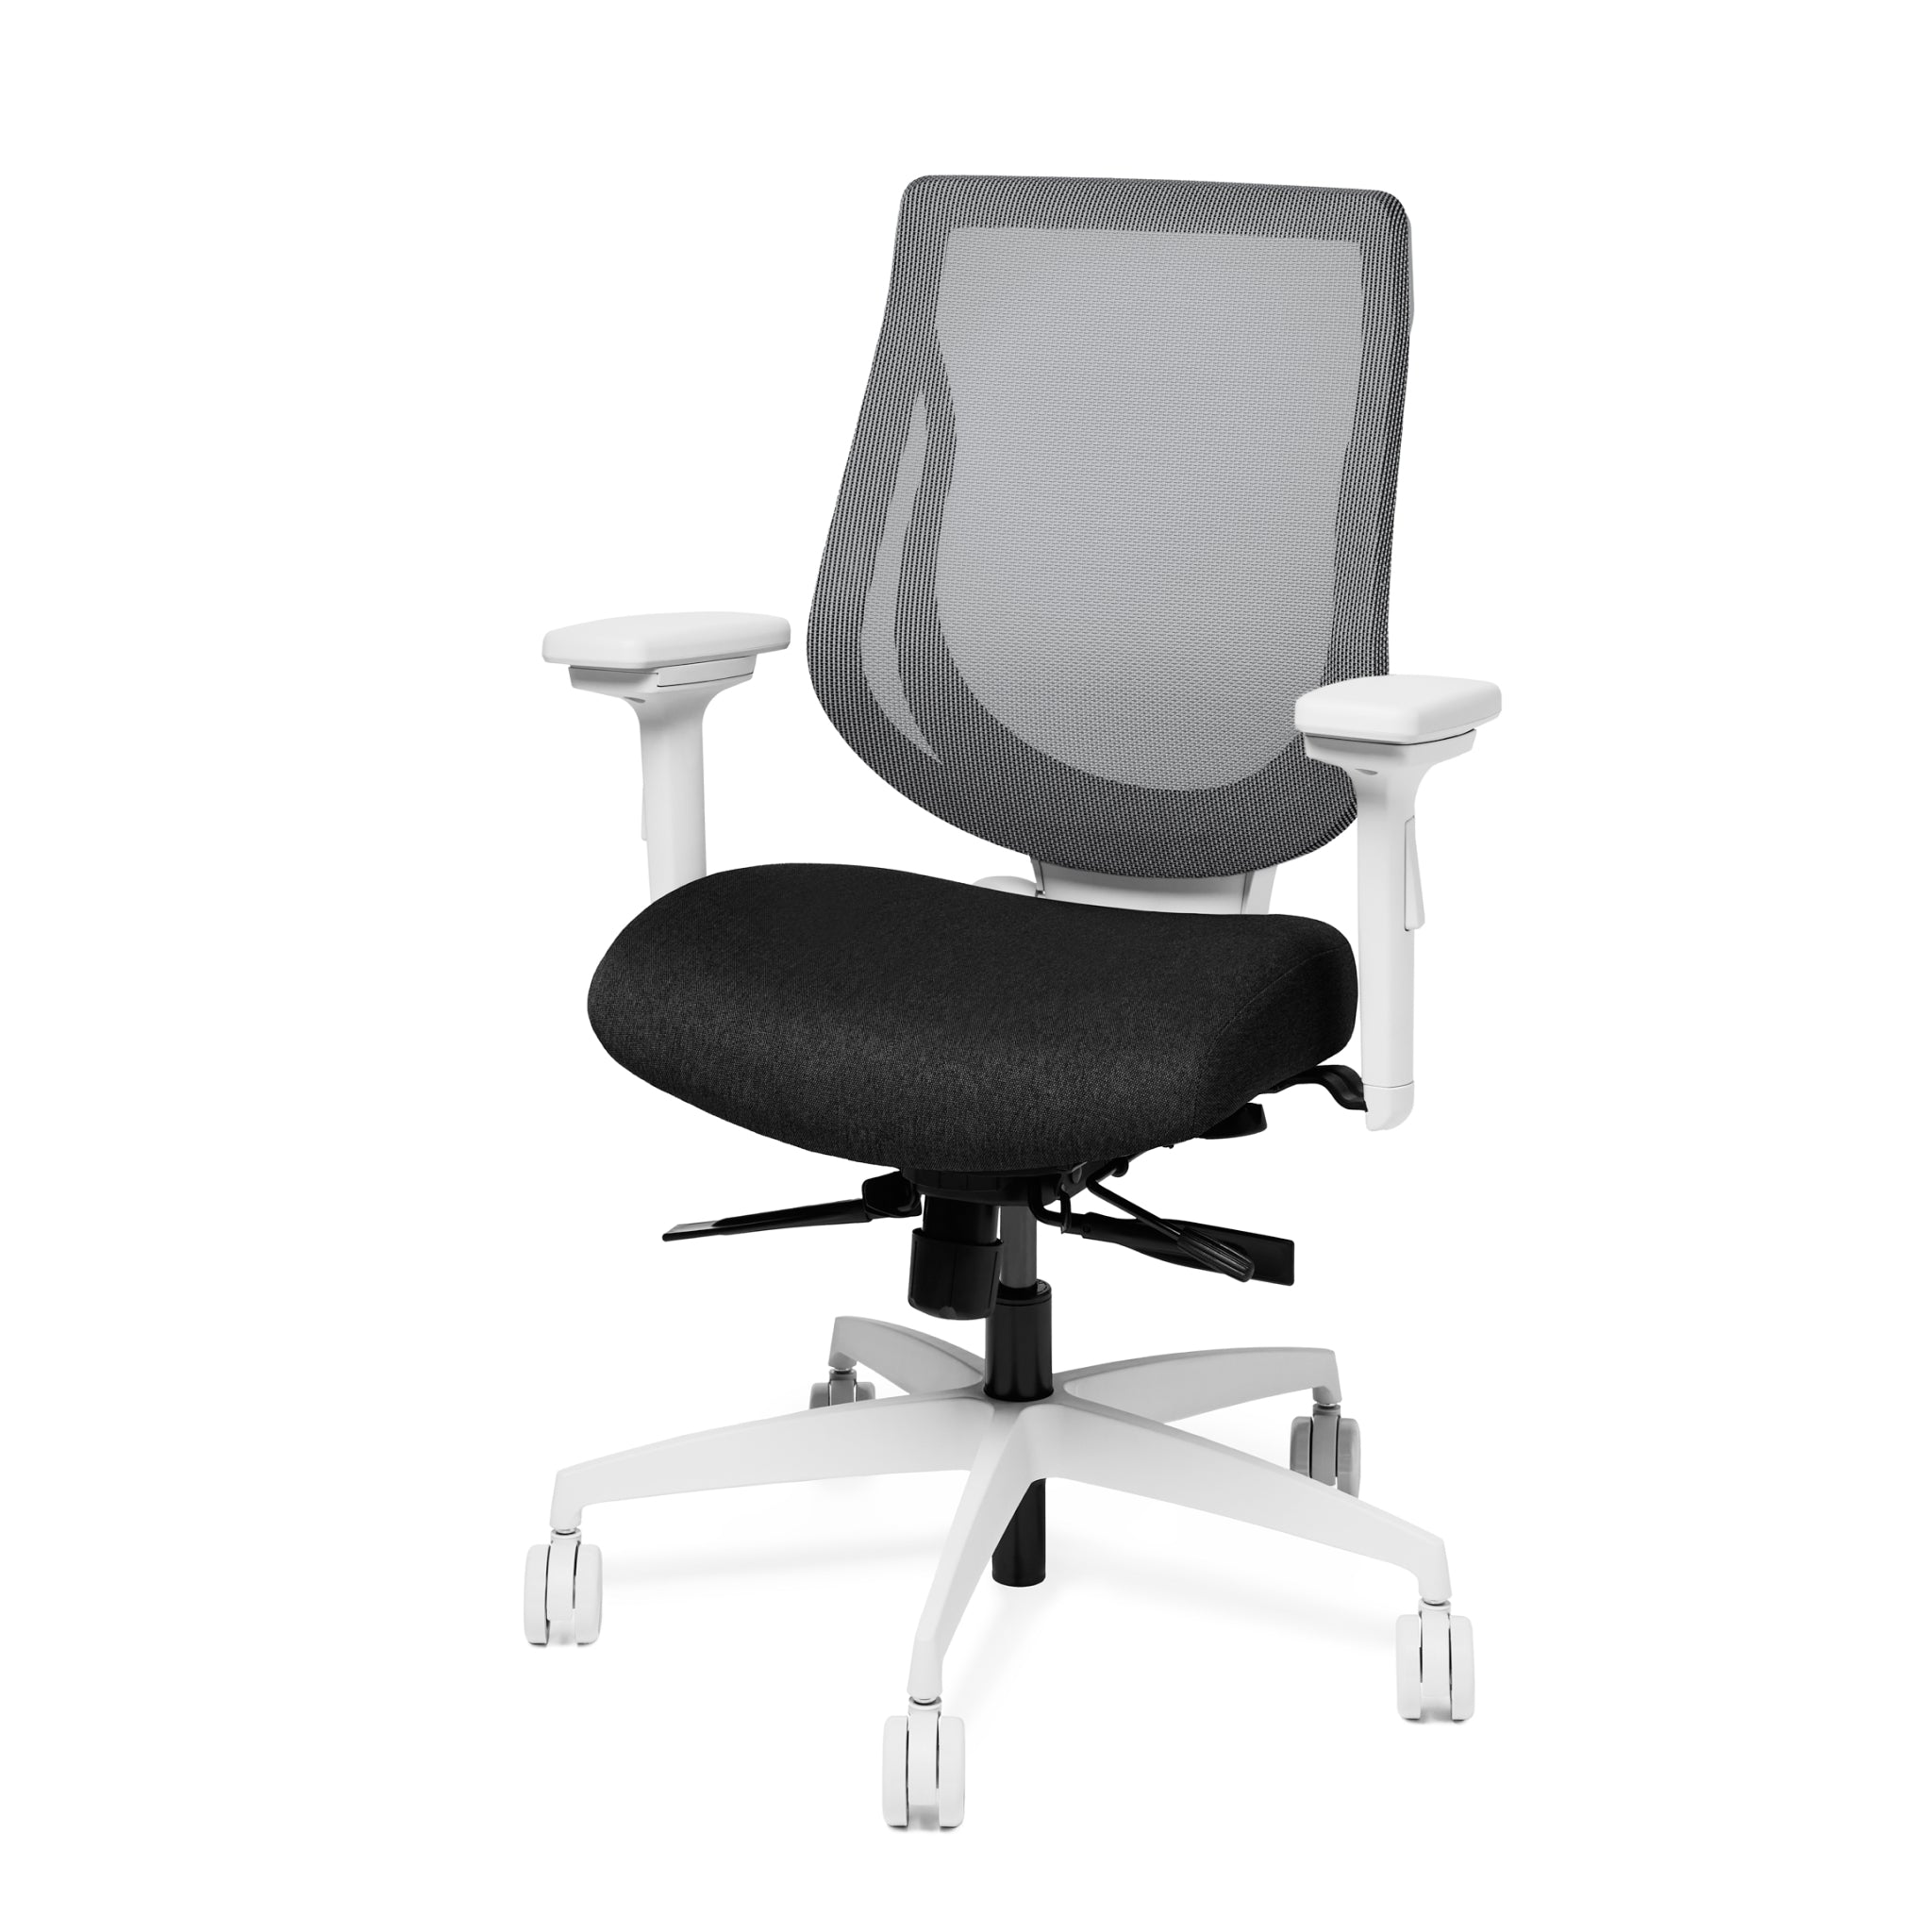 Small YouToo Ergonomic Chair - Ash-Stone – Pepper